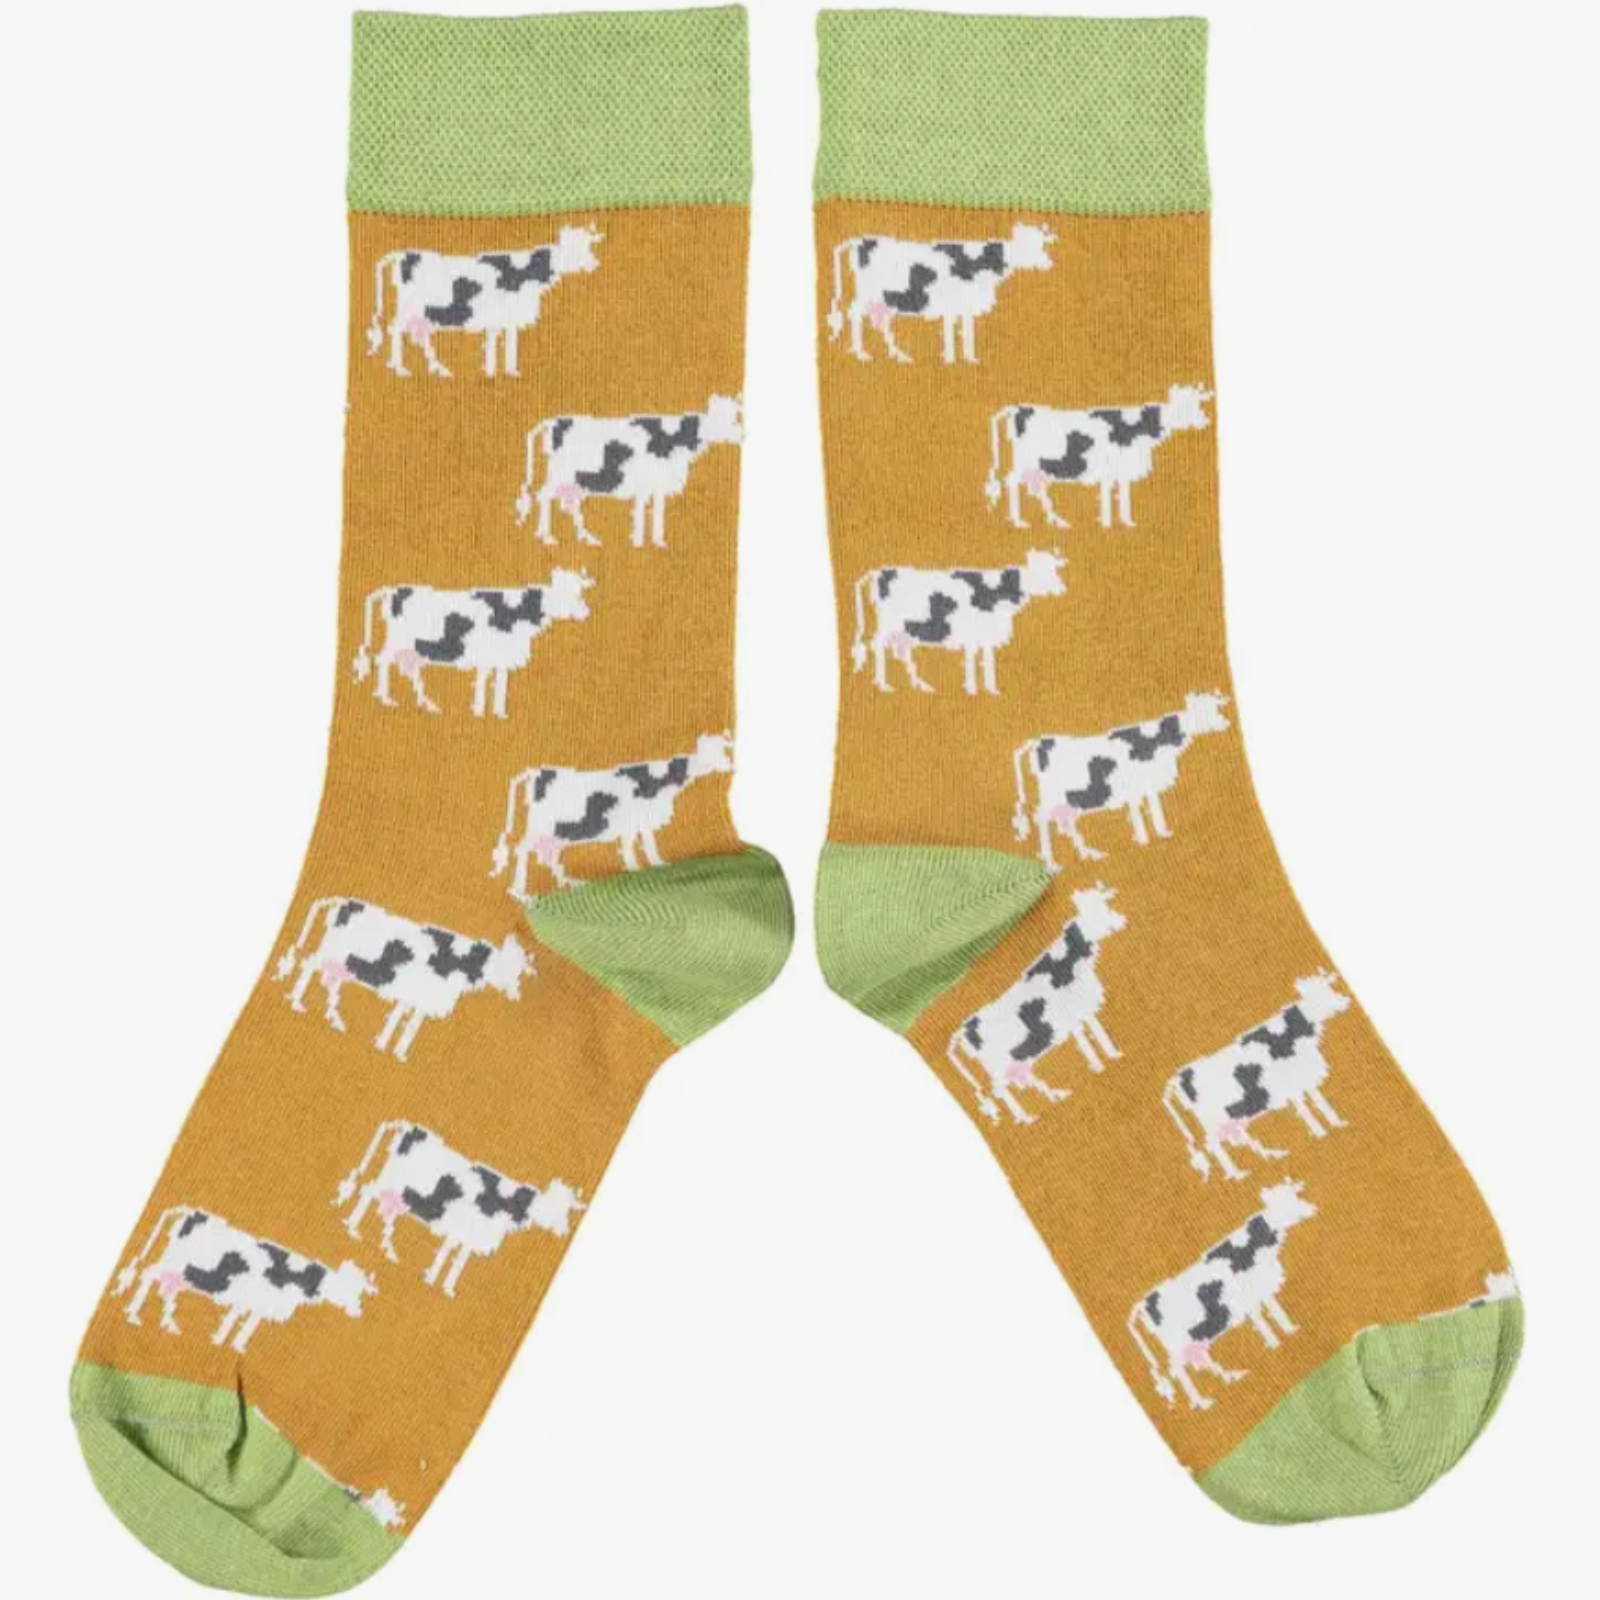 Catherine Tough Cow cotton women's crew socks featuring black and white cows on a ginger background with light green cuff, heel and toe